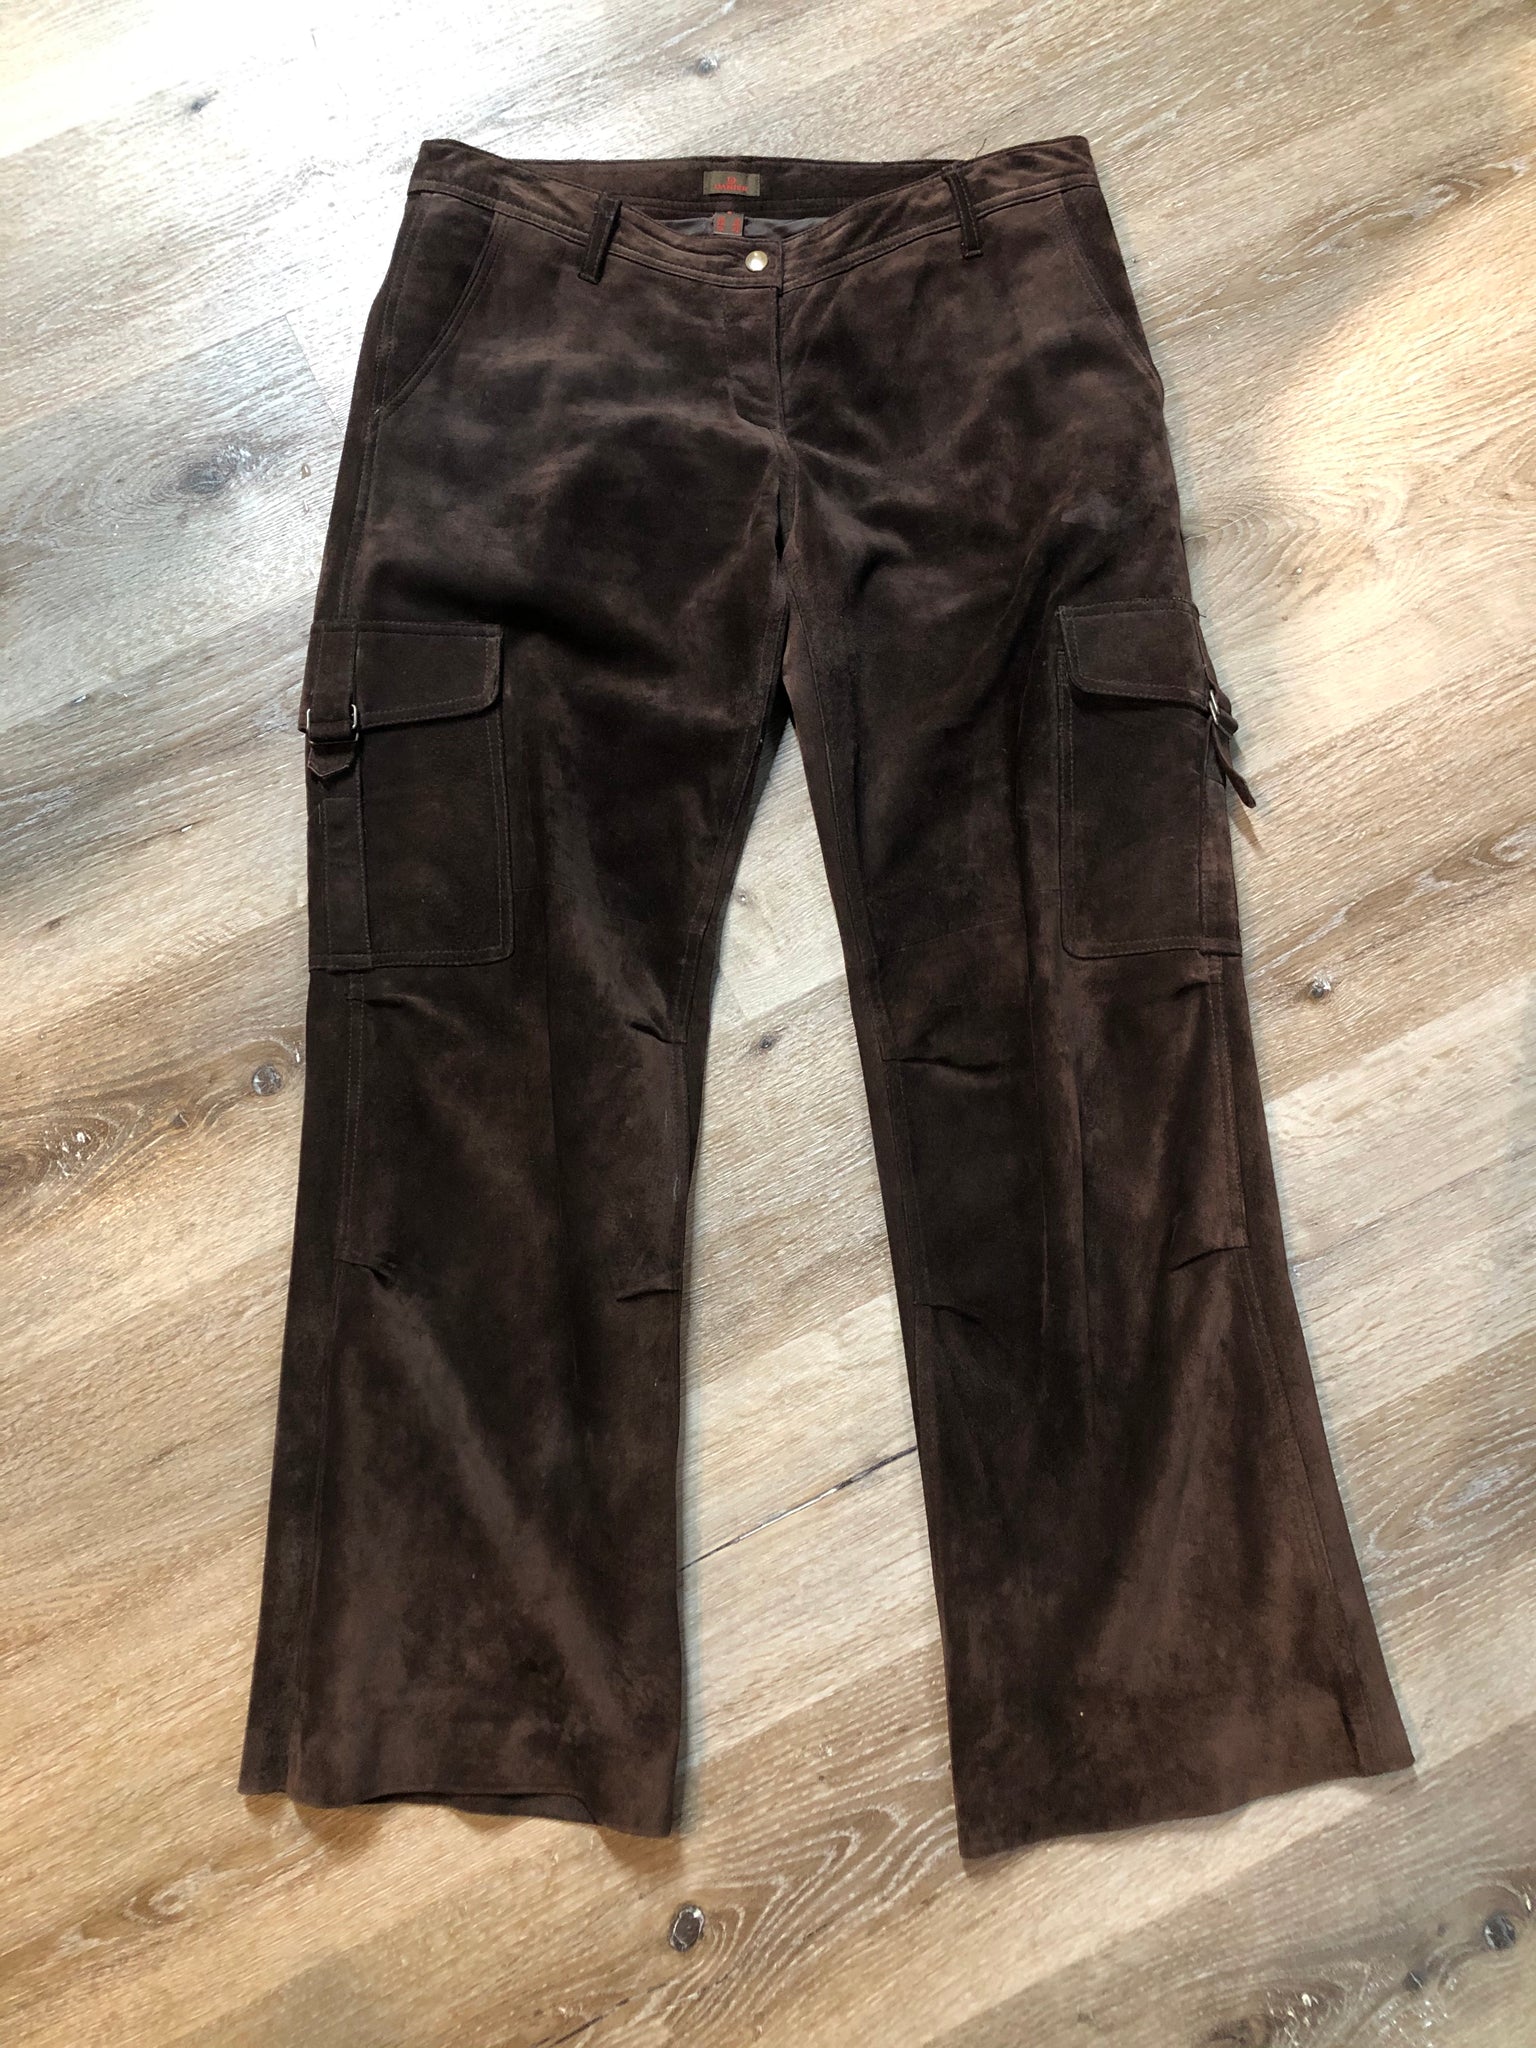 Suede Pants, Women's Size Small 4 USA, Russet Brown 90s Vintage